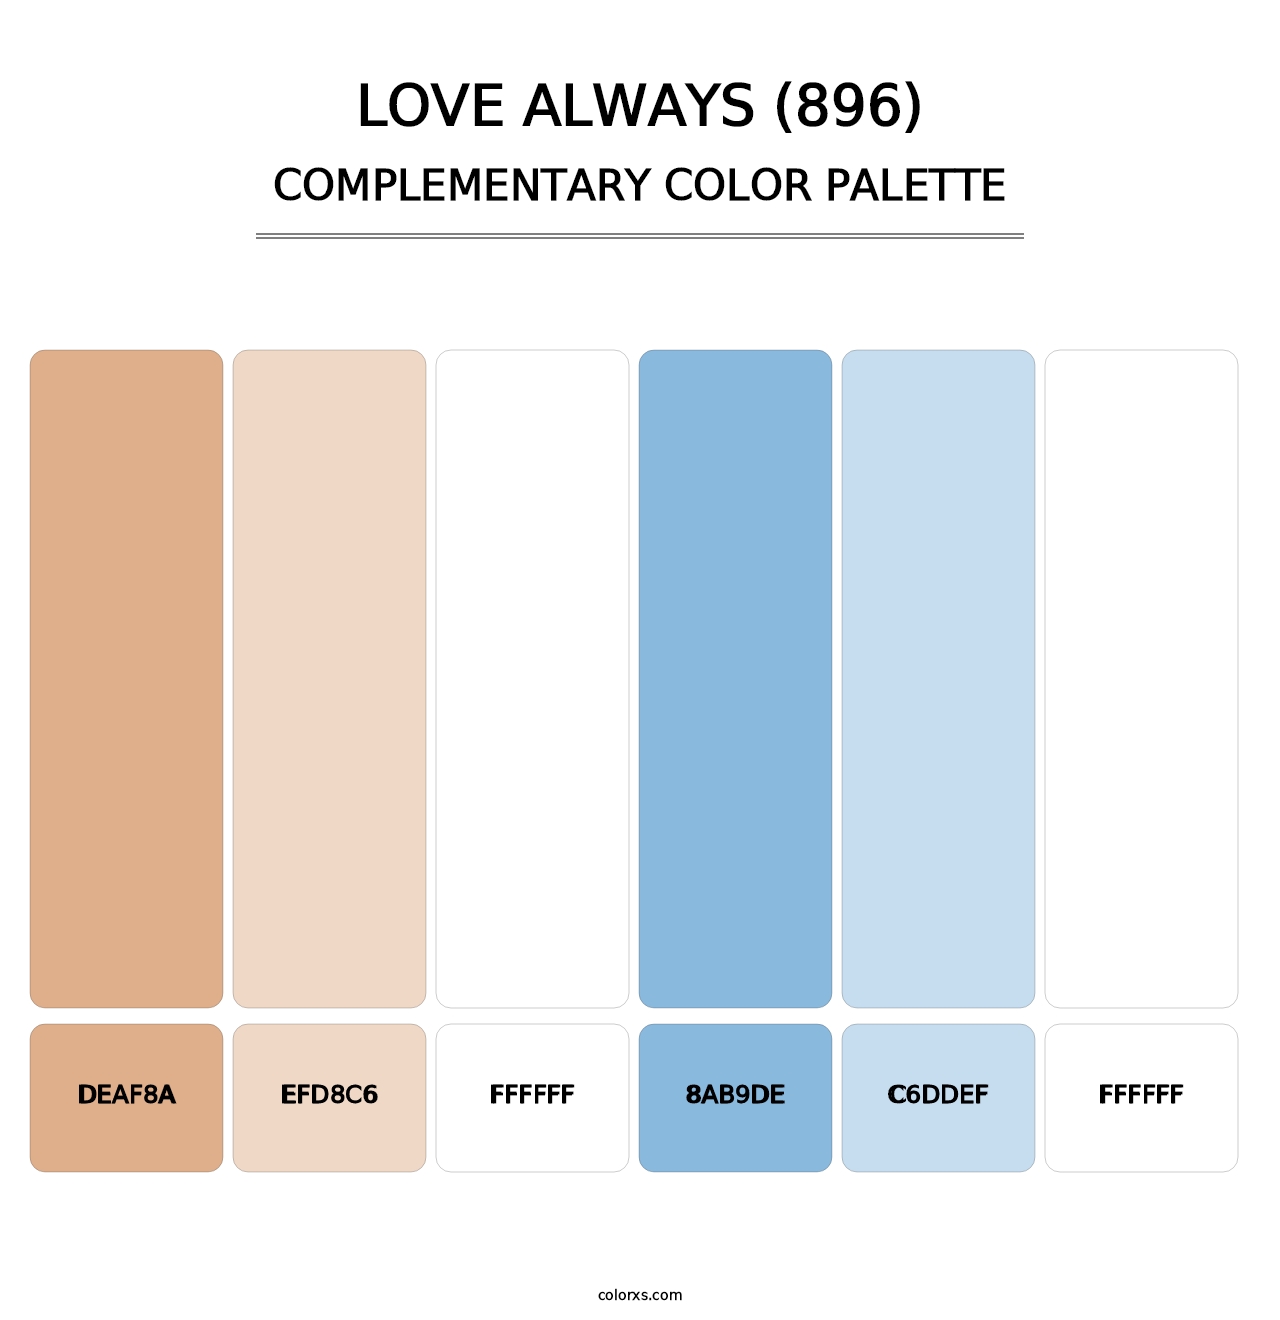 Love Always (896) - Complementary Color Palette